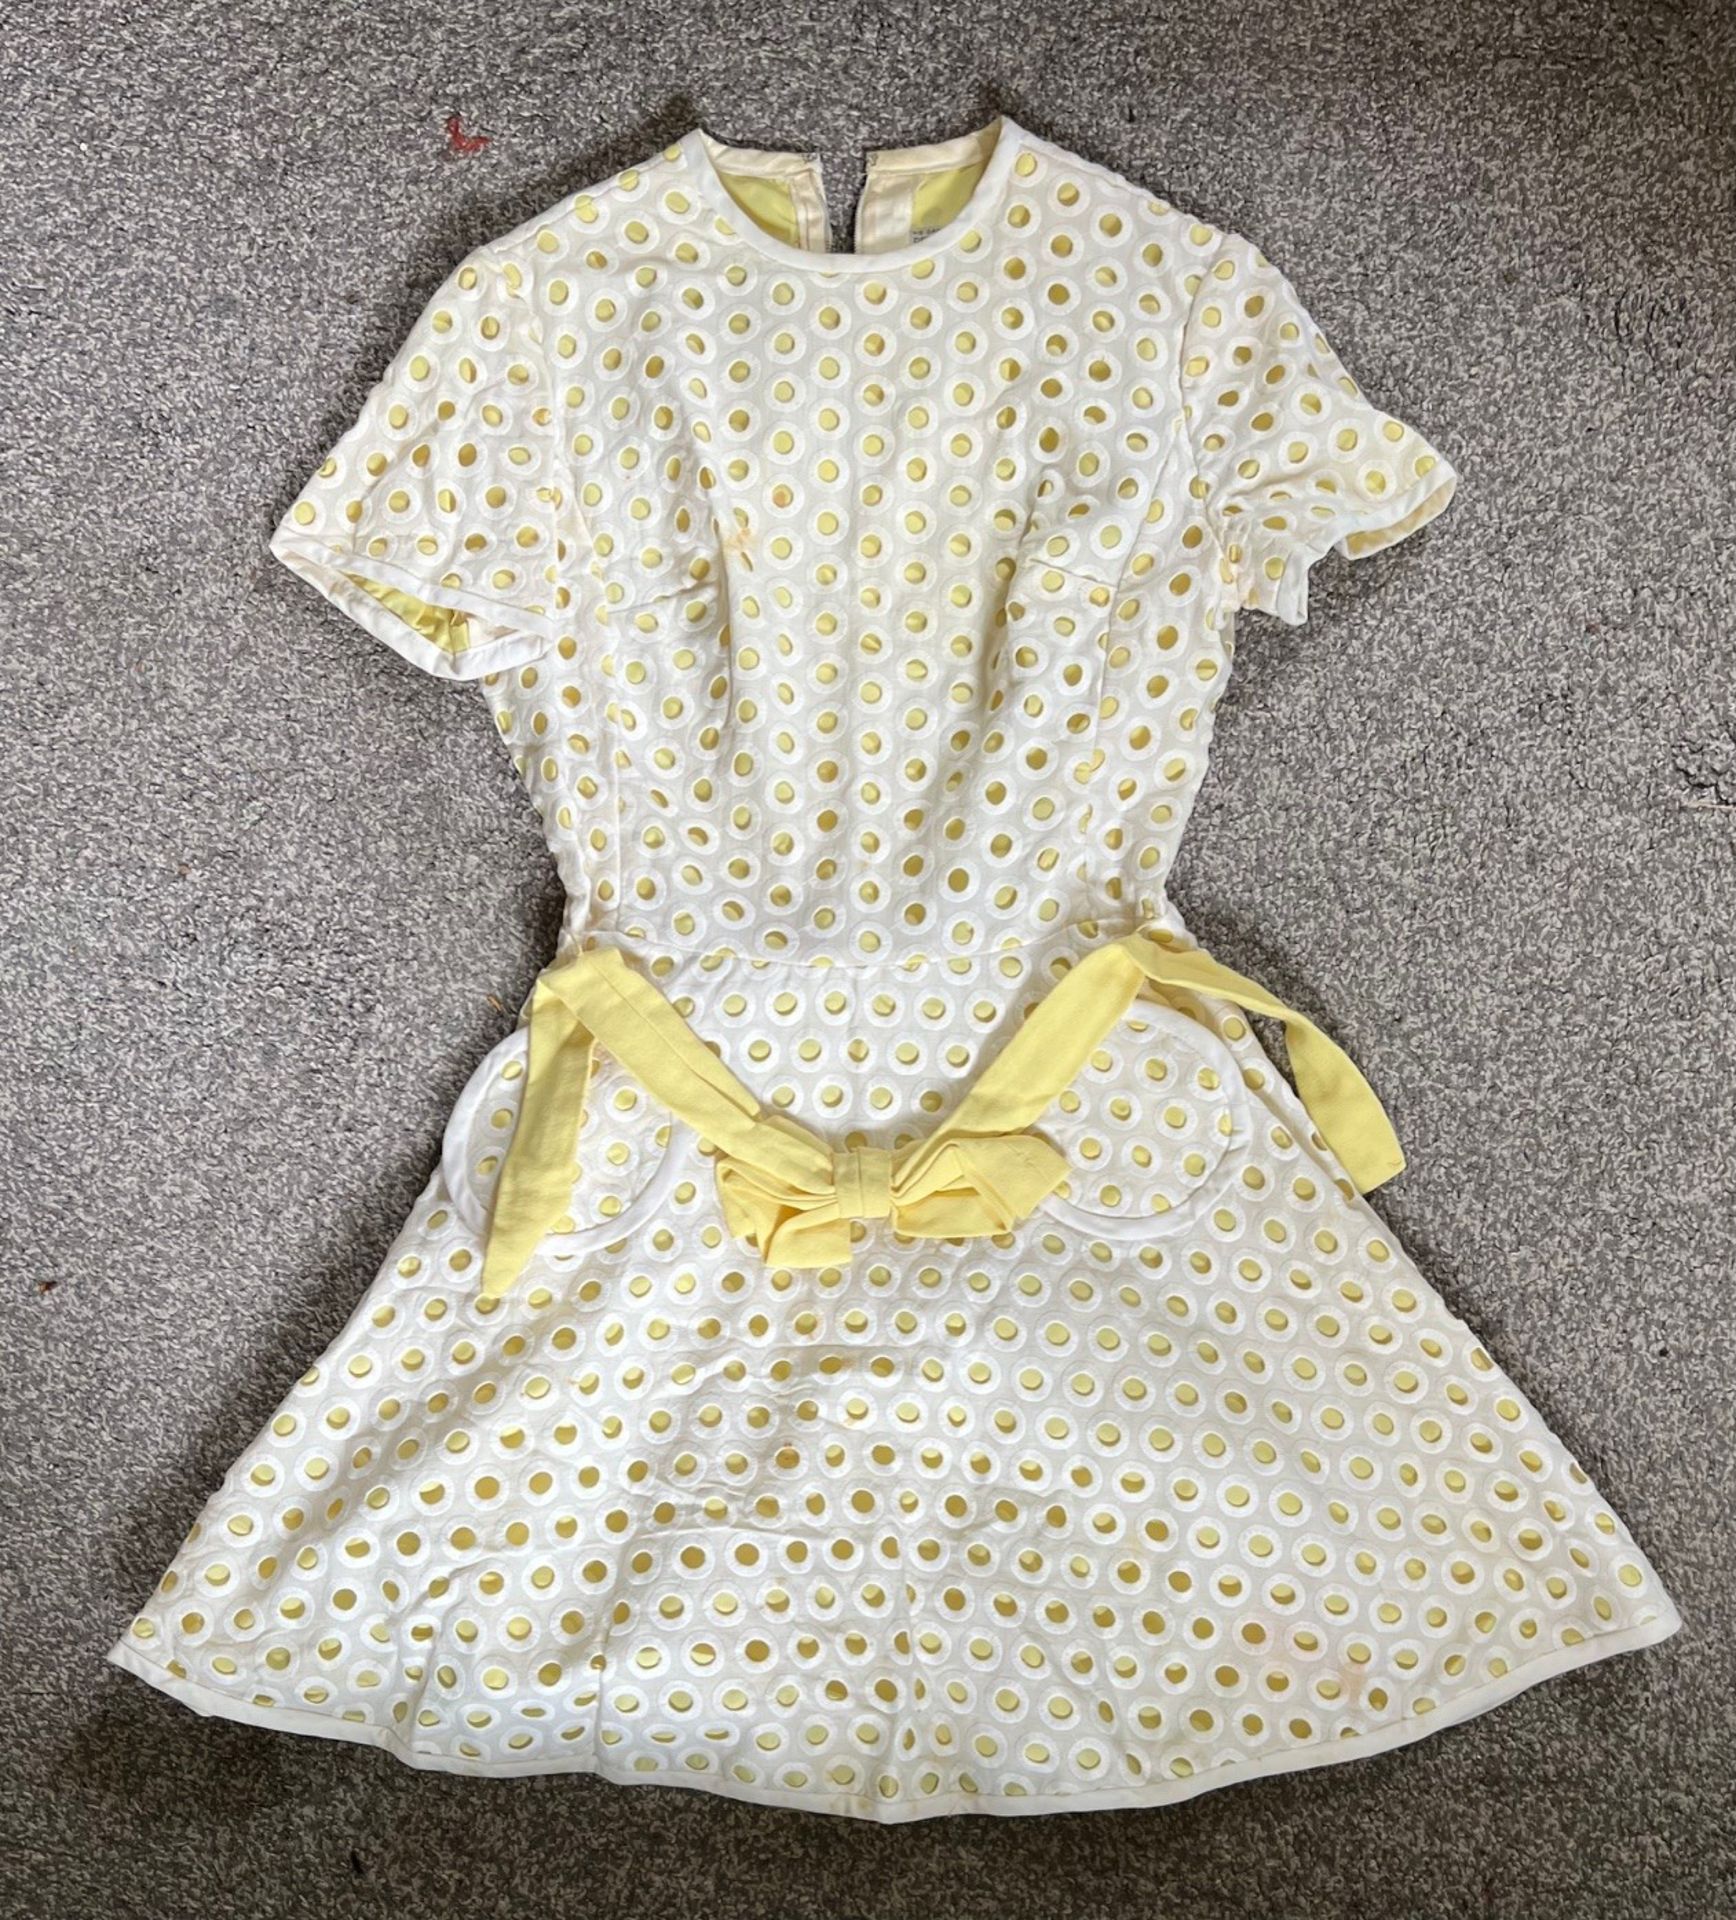 'JEAN ALLEN' 60s STYLE DRESS, WHITE BRODERIE ANGLAISE WITH YELLOW LINING, SIZE 14